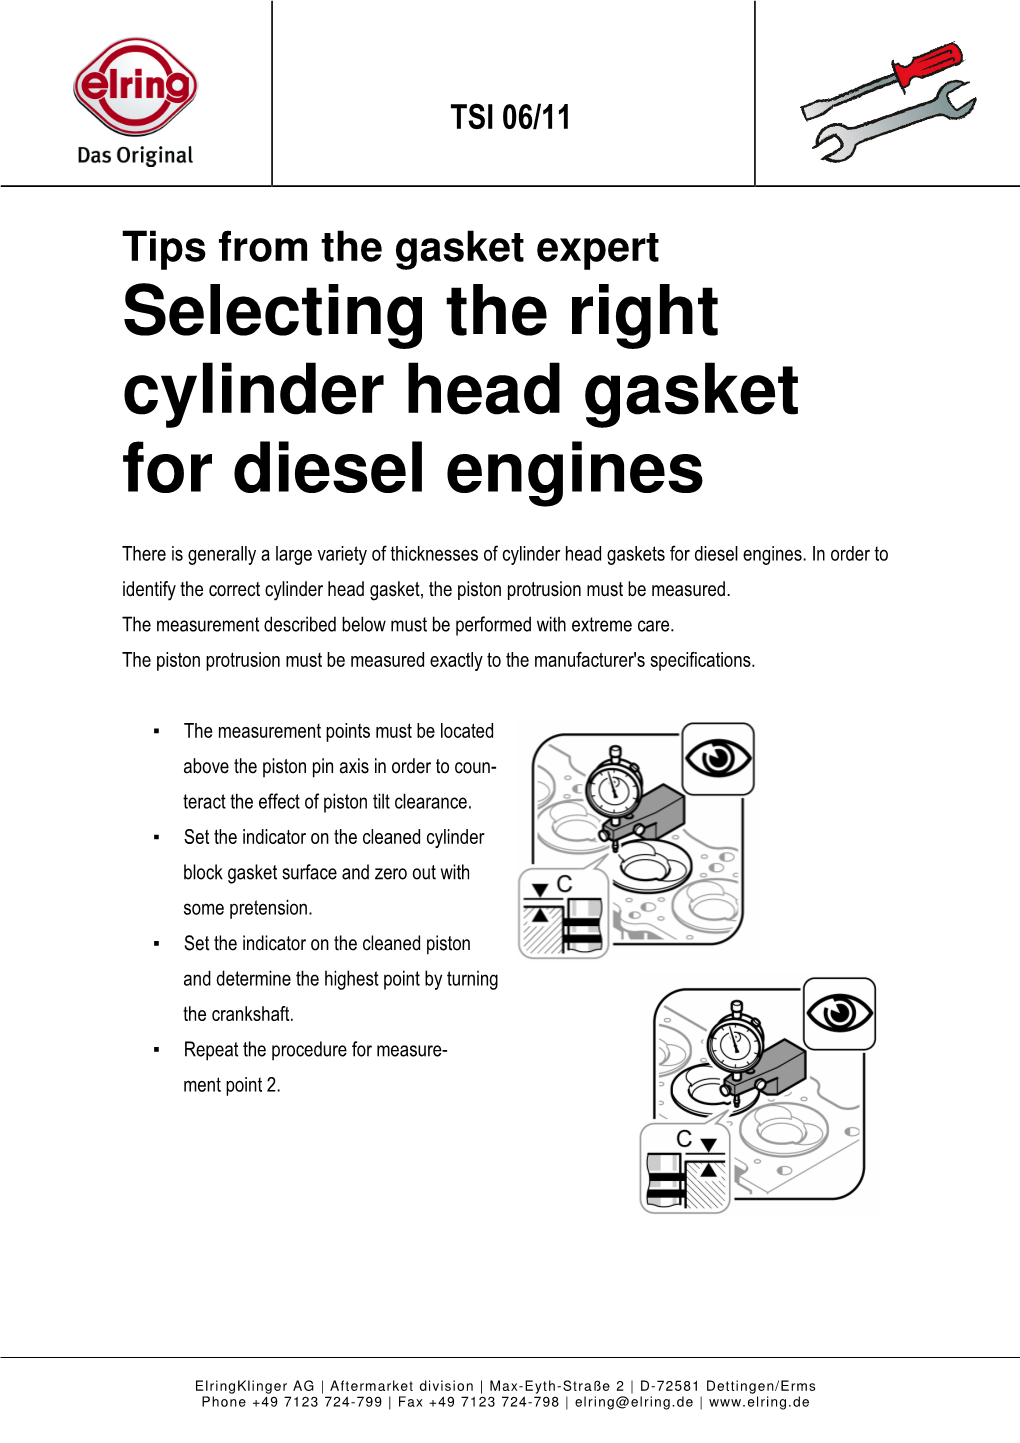 Selecting the Right Cylinder Head Gasket for Diesel Engines